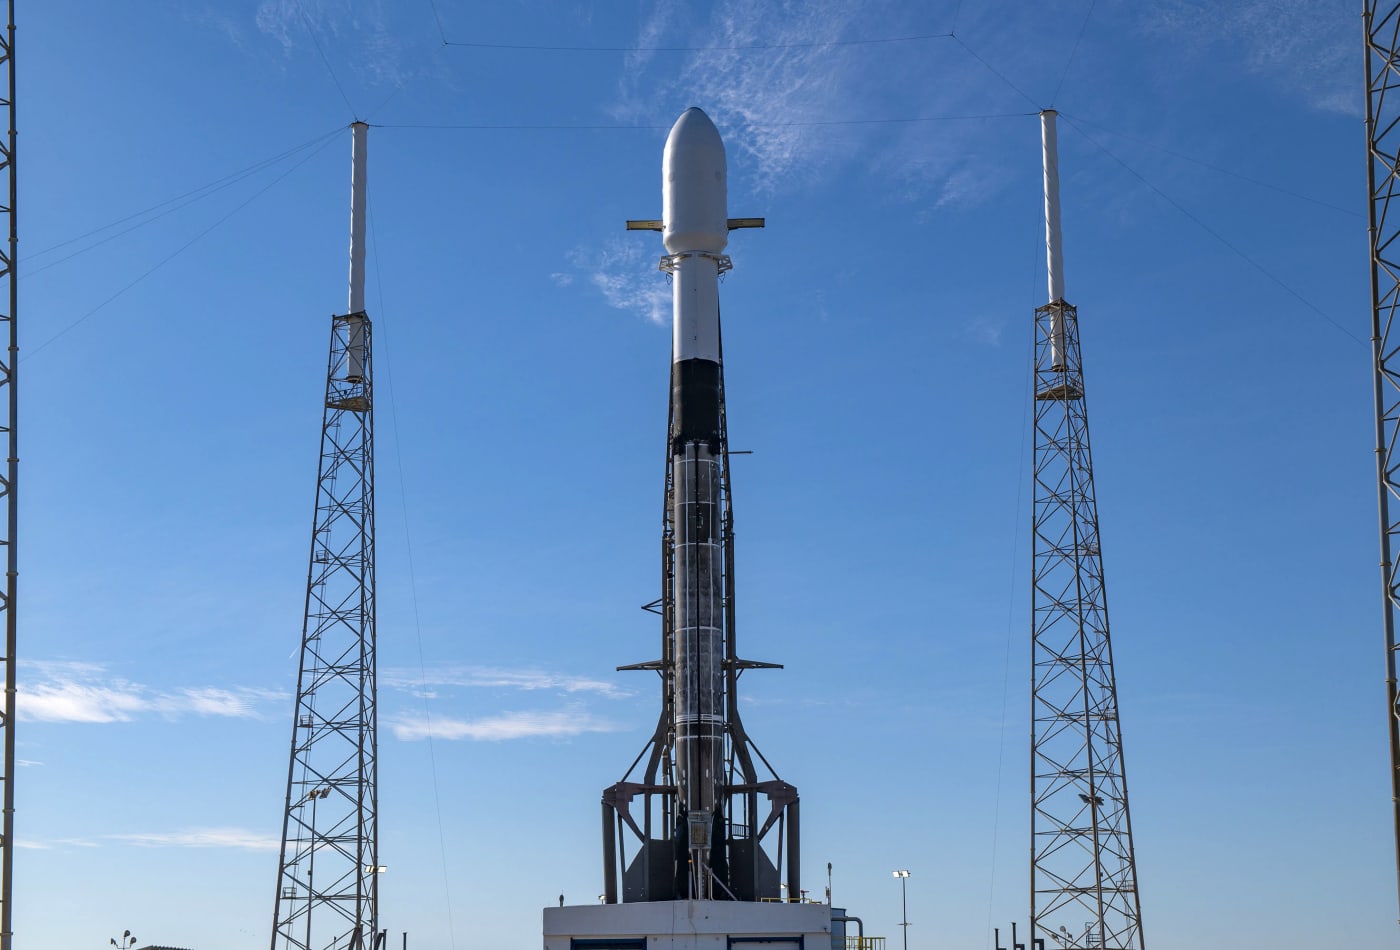 SpaceX launches a ‘rideshare’ mission, carrying a record amount of Spacecraft for a Single Launch